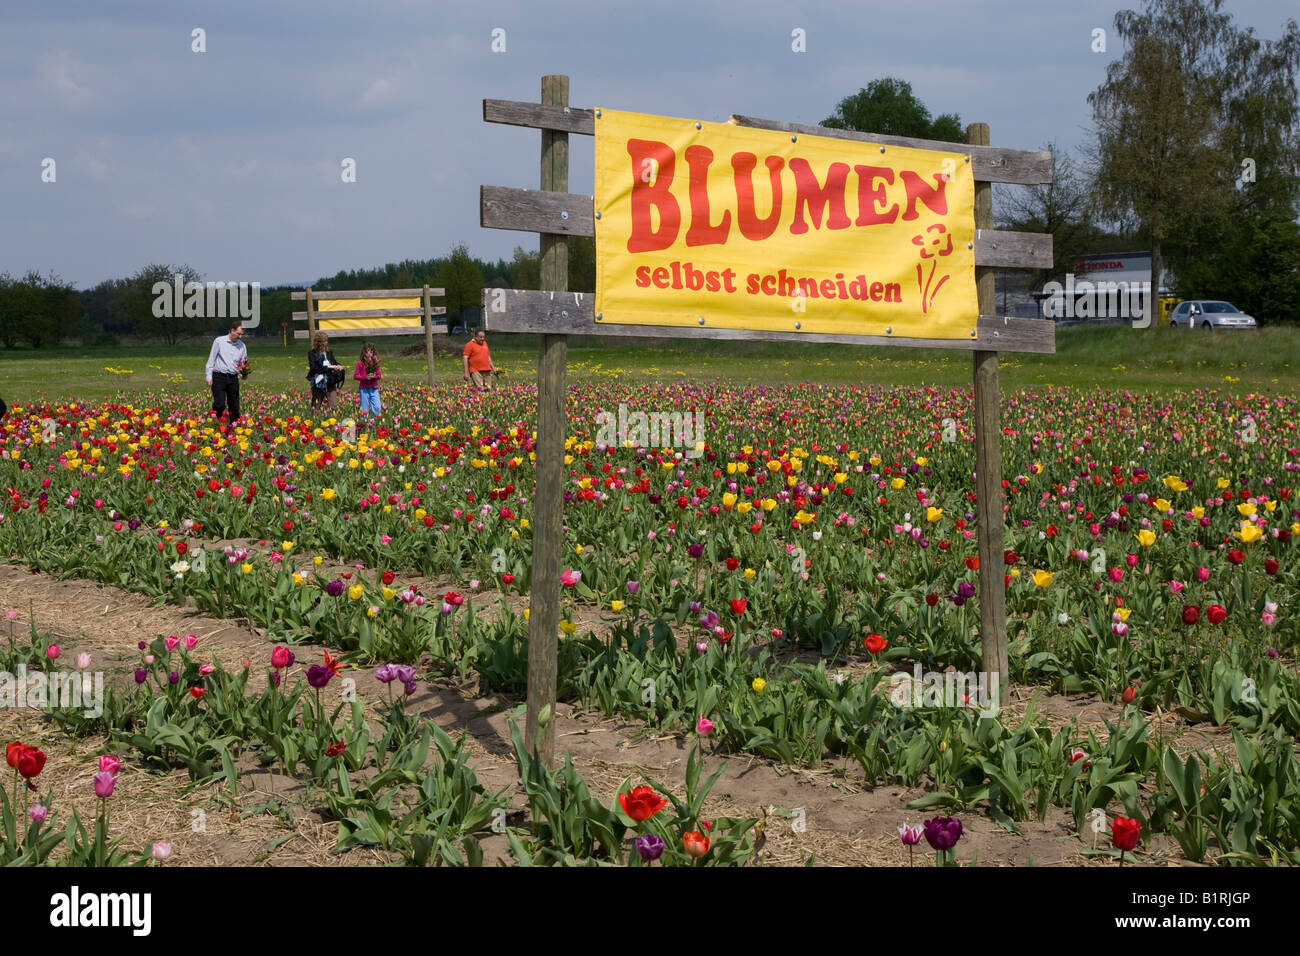 Sign reading Blumen selbst schneiden, pick flowers yourself, field of tulips, people holding flowers, Bergstrasse mountain rout Stock Photo